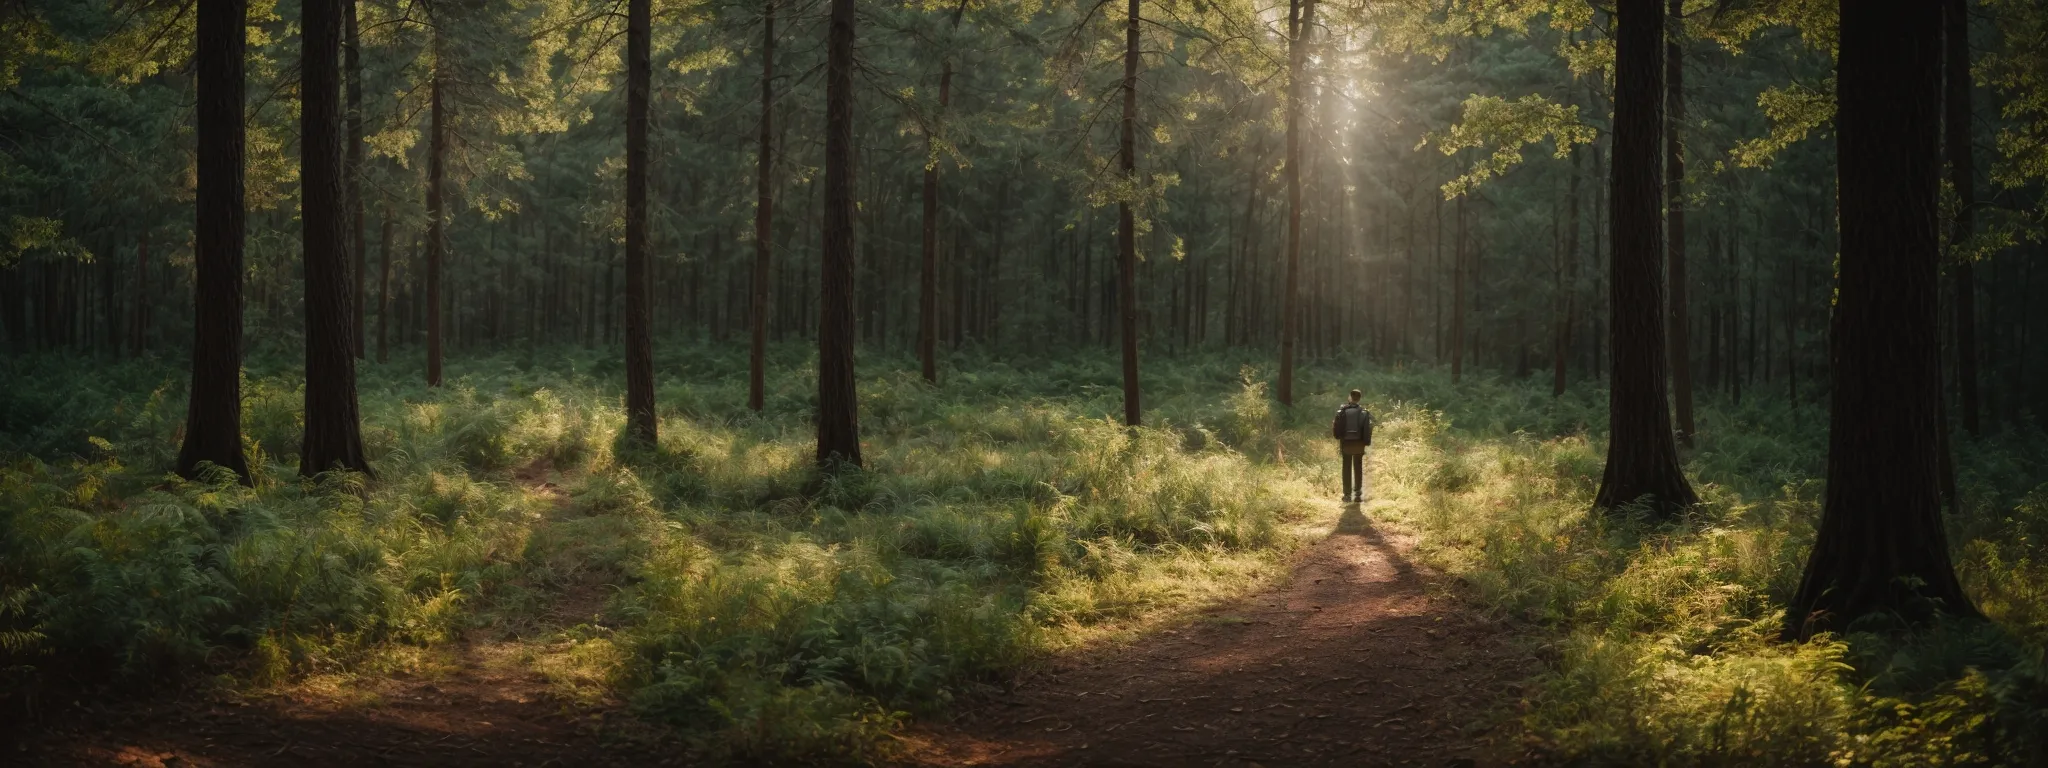 a figure standing at a crossroads in a vast, sunlit forest, contemplating two diverging paths.